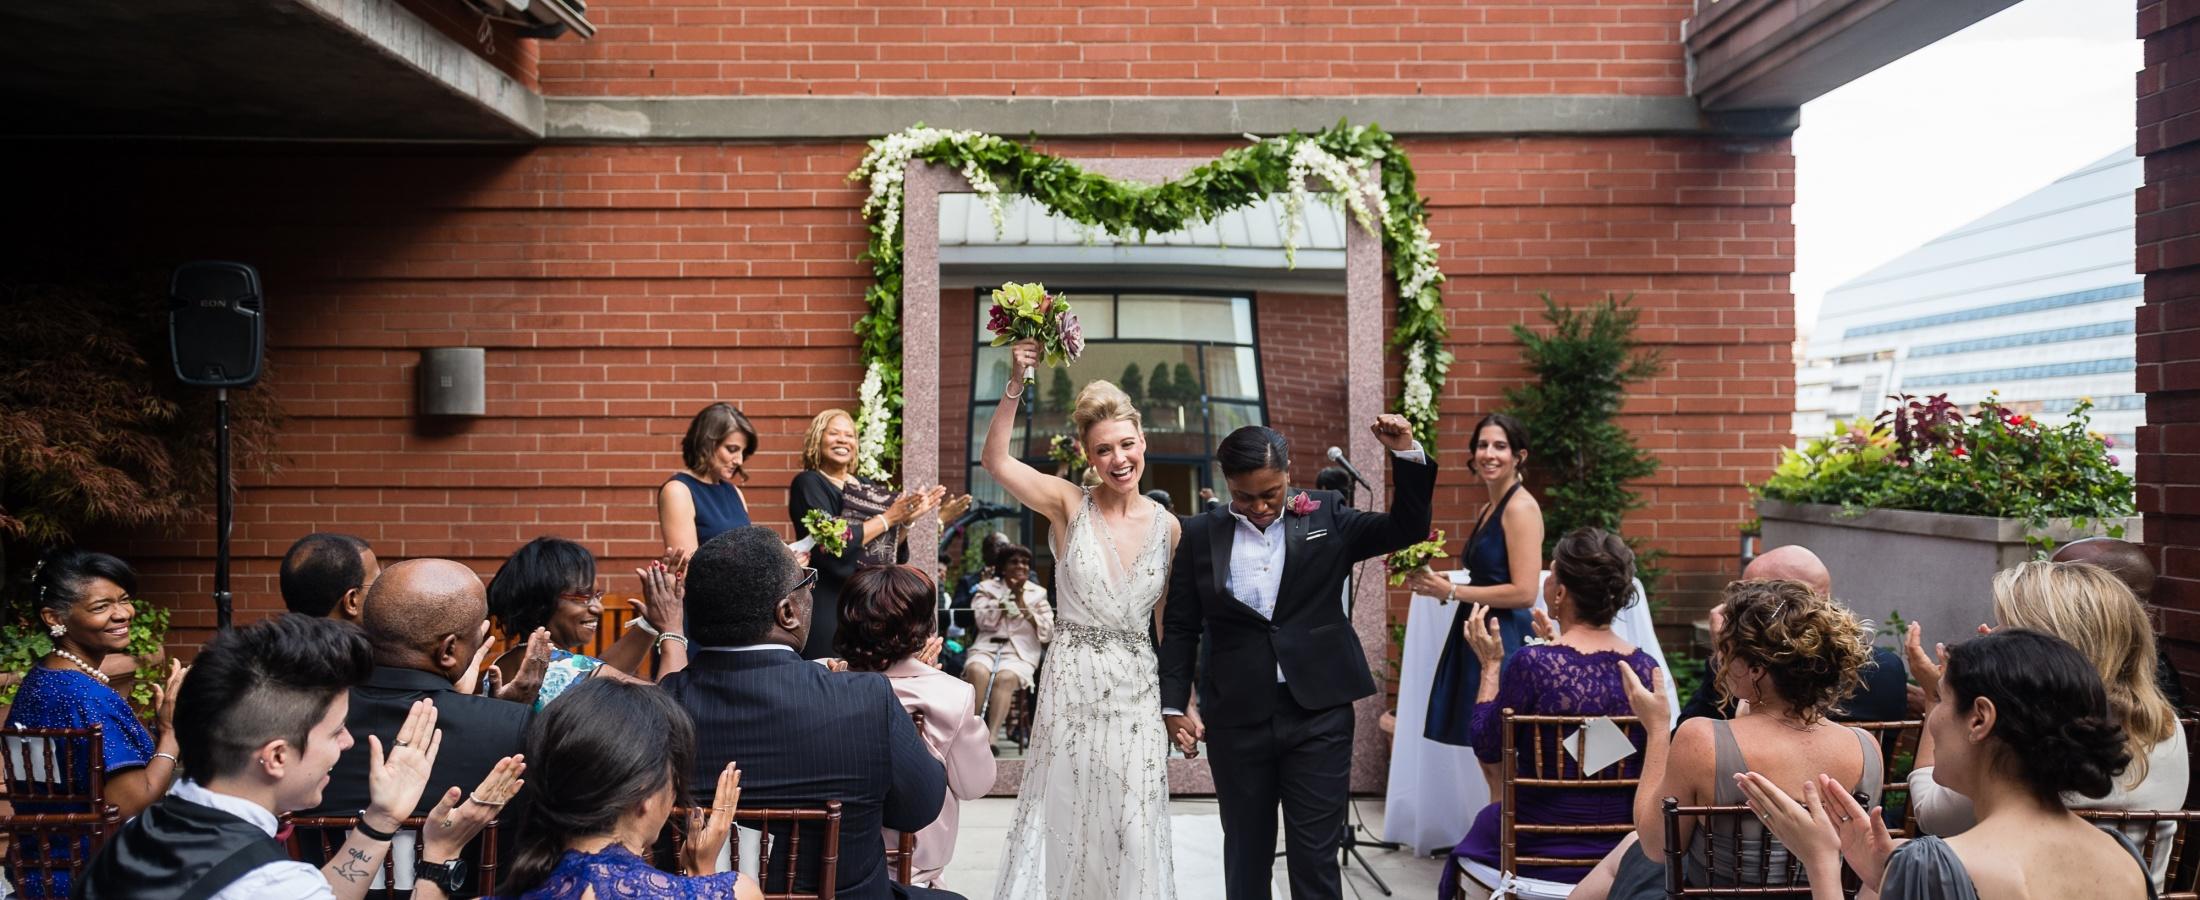 Our outdoor rooftop offers an intimate space for small wedding ceremonies.